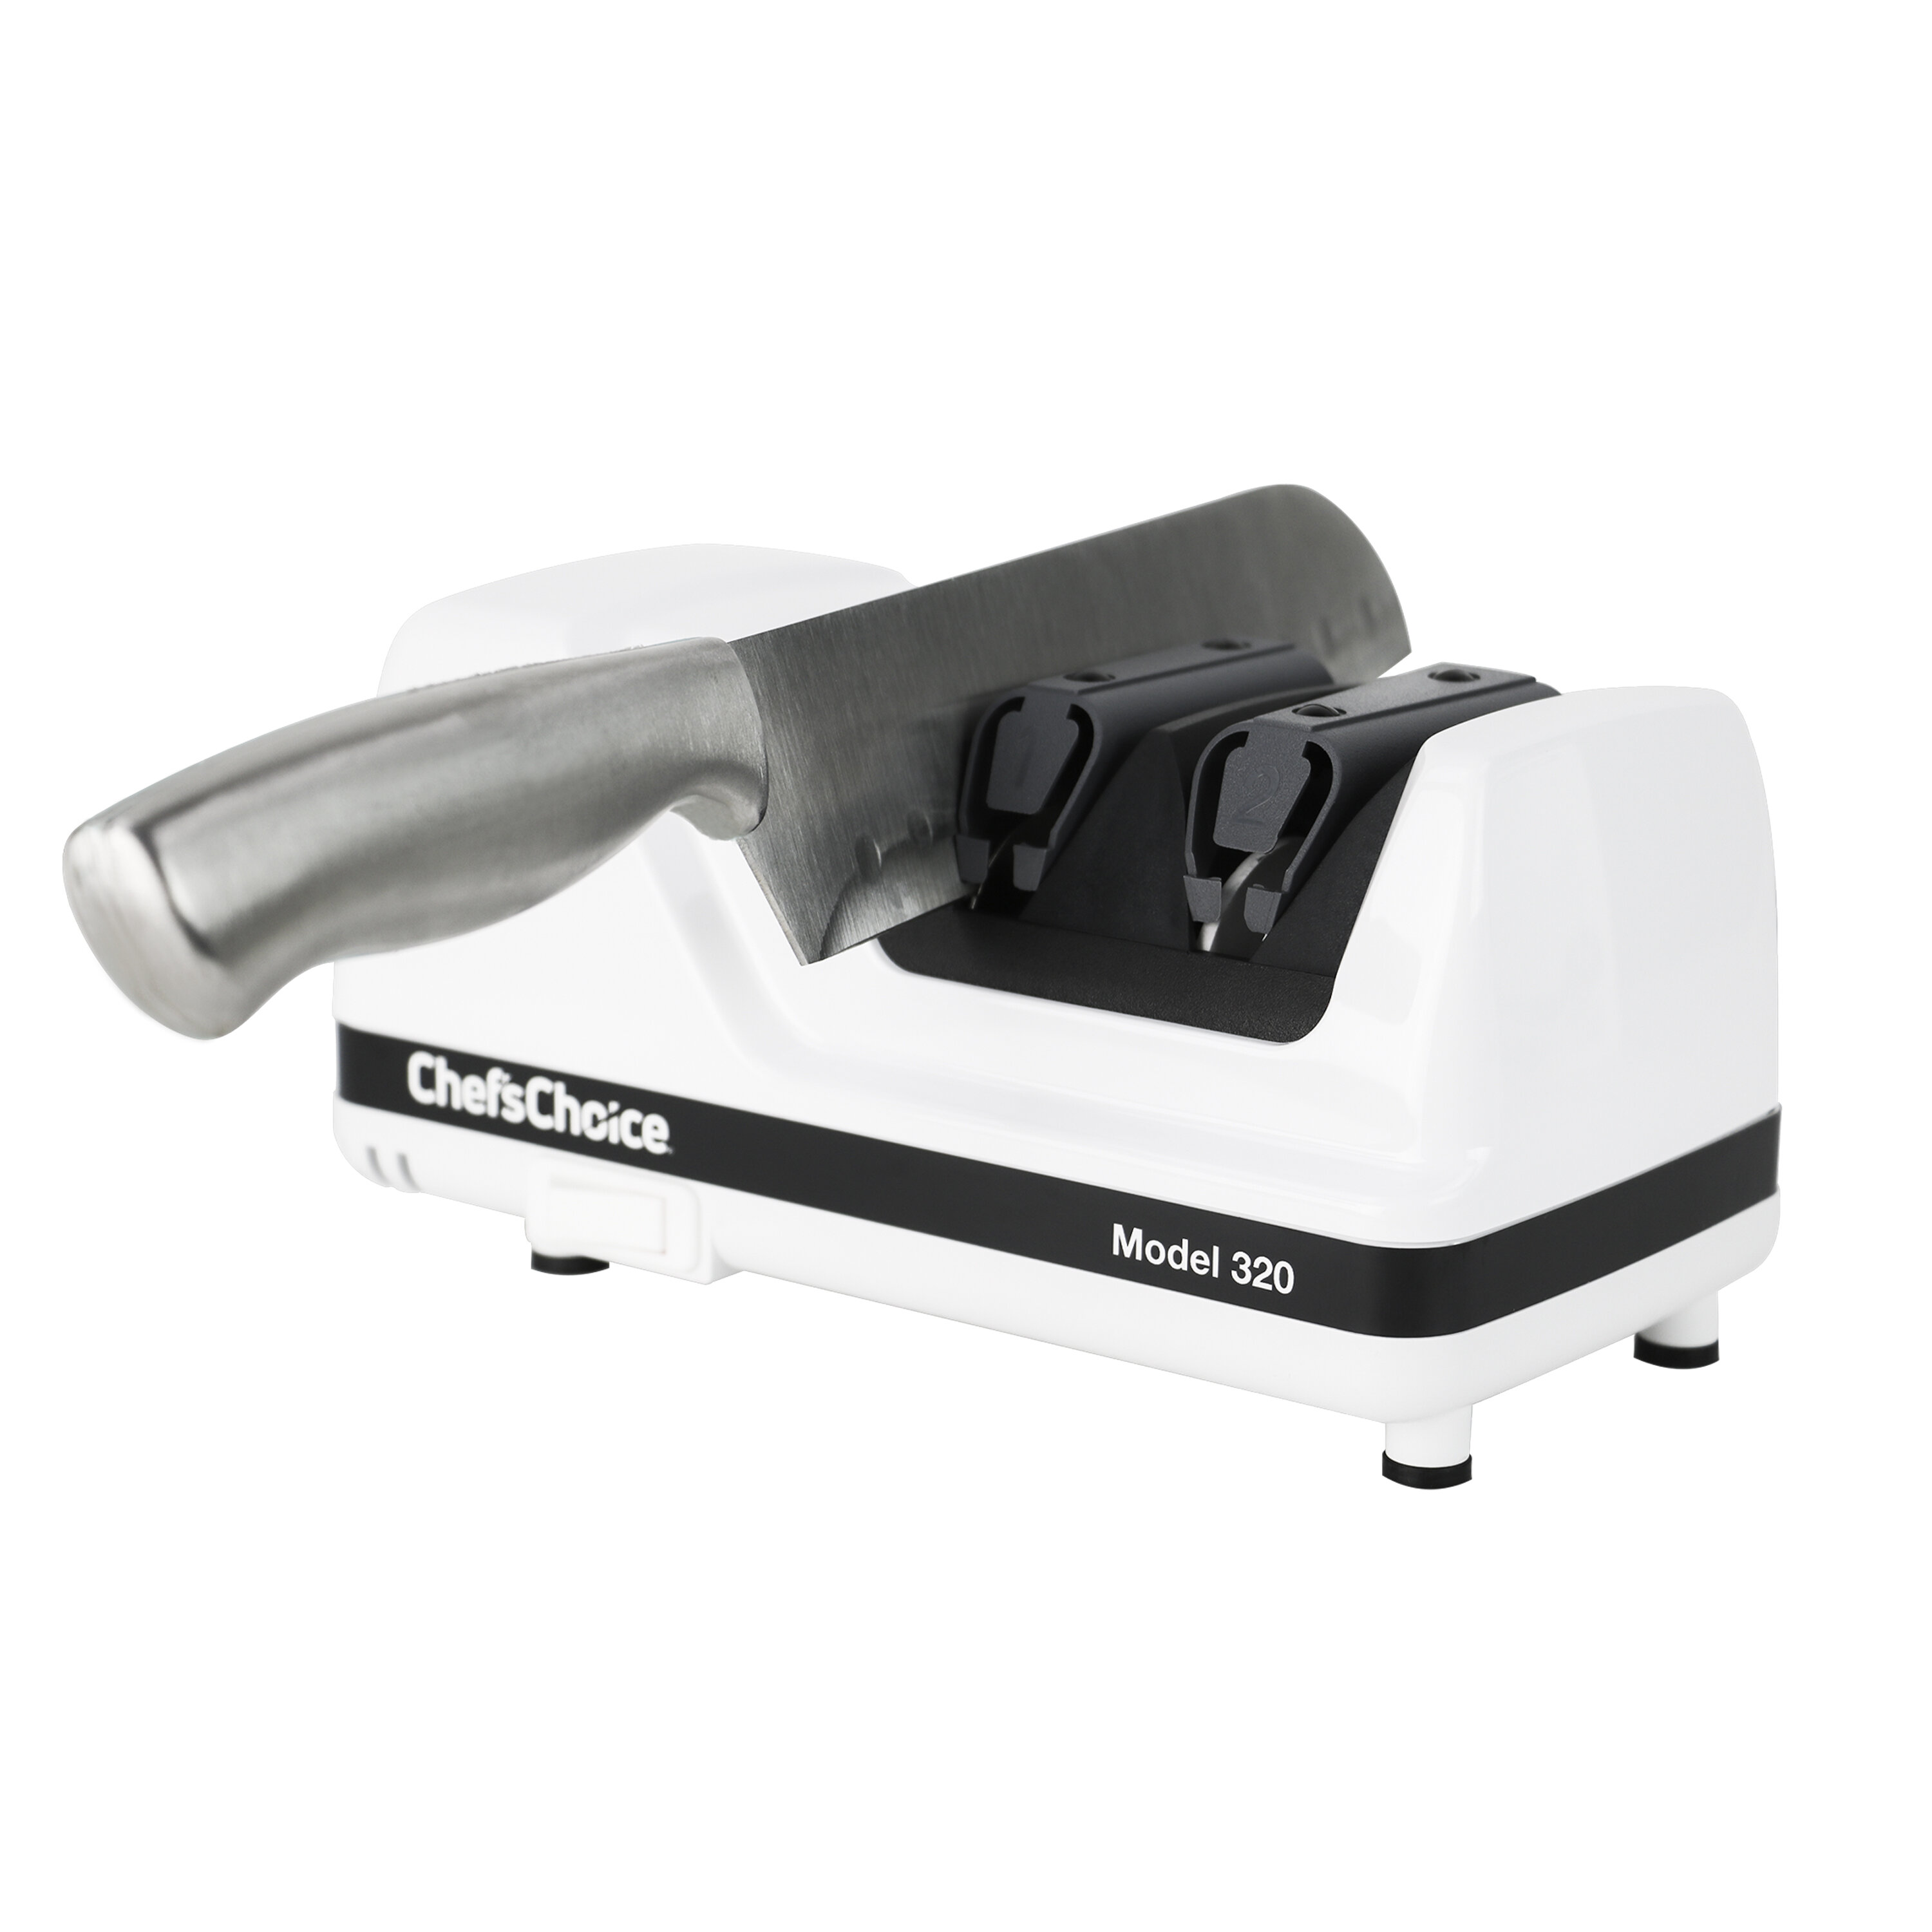 Keep your knives sharp and cutting like new with the Chef'sChoice Model 316  Electric Knife Sharpener. The Chef'sChoice Model 316 has two sharpening  stages that sharpen the edge at 15 degrees. Both